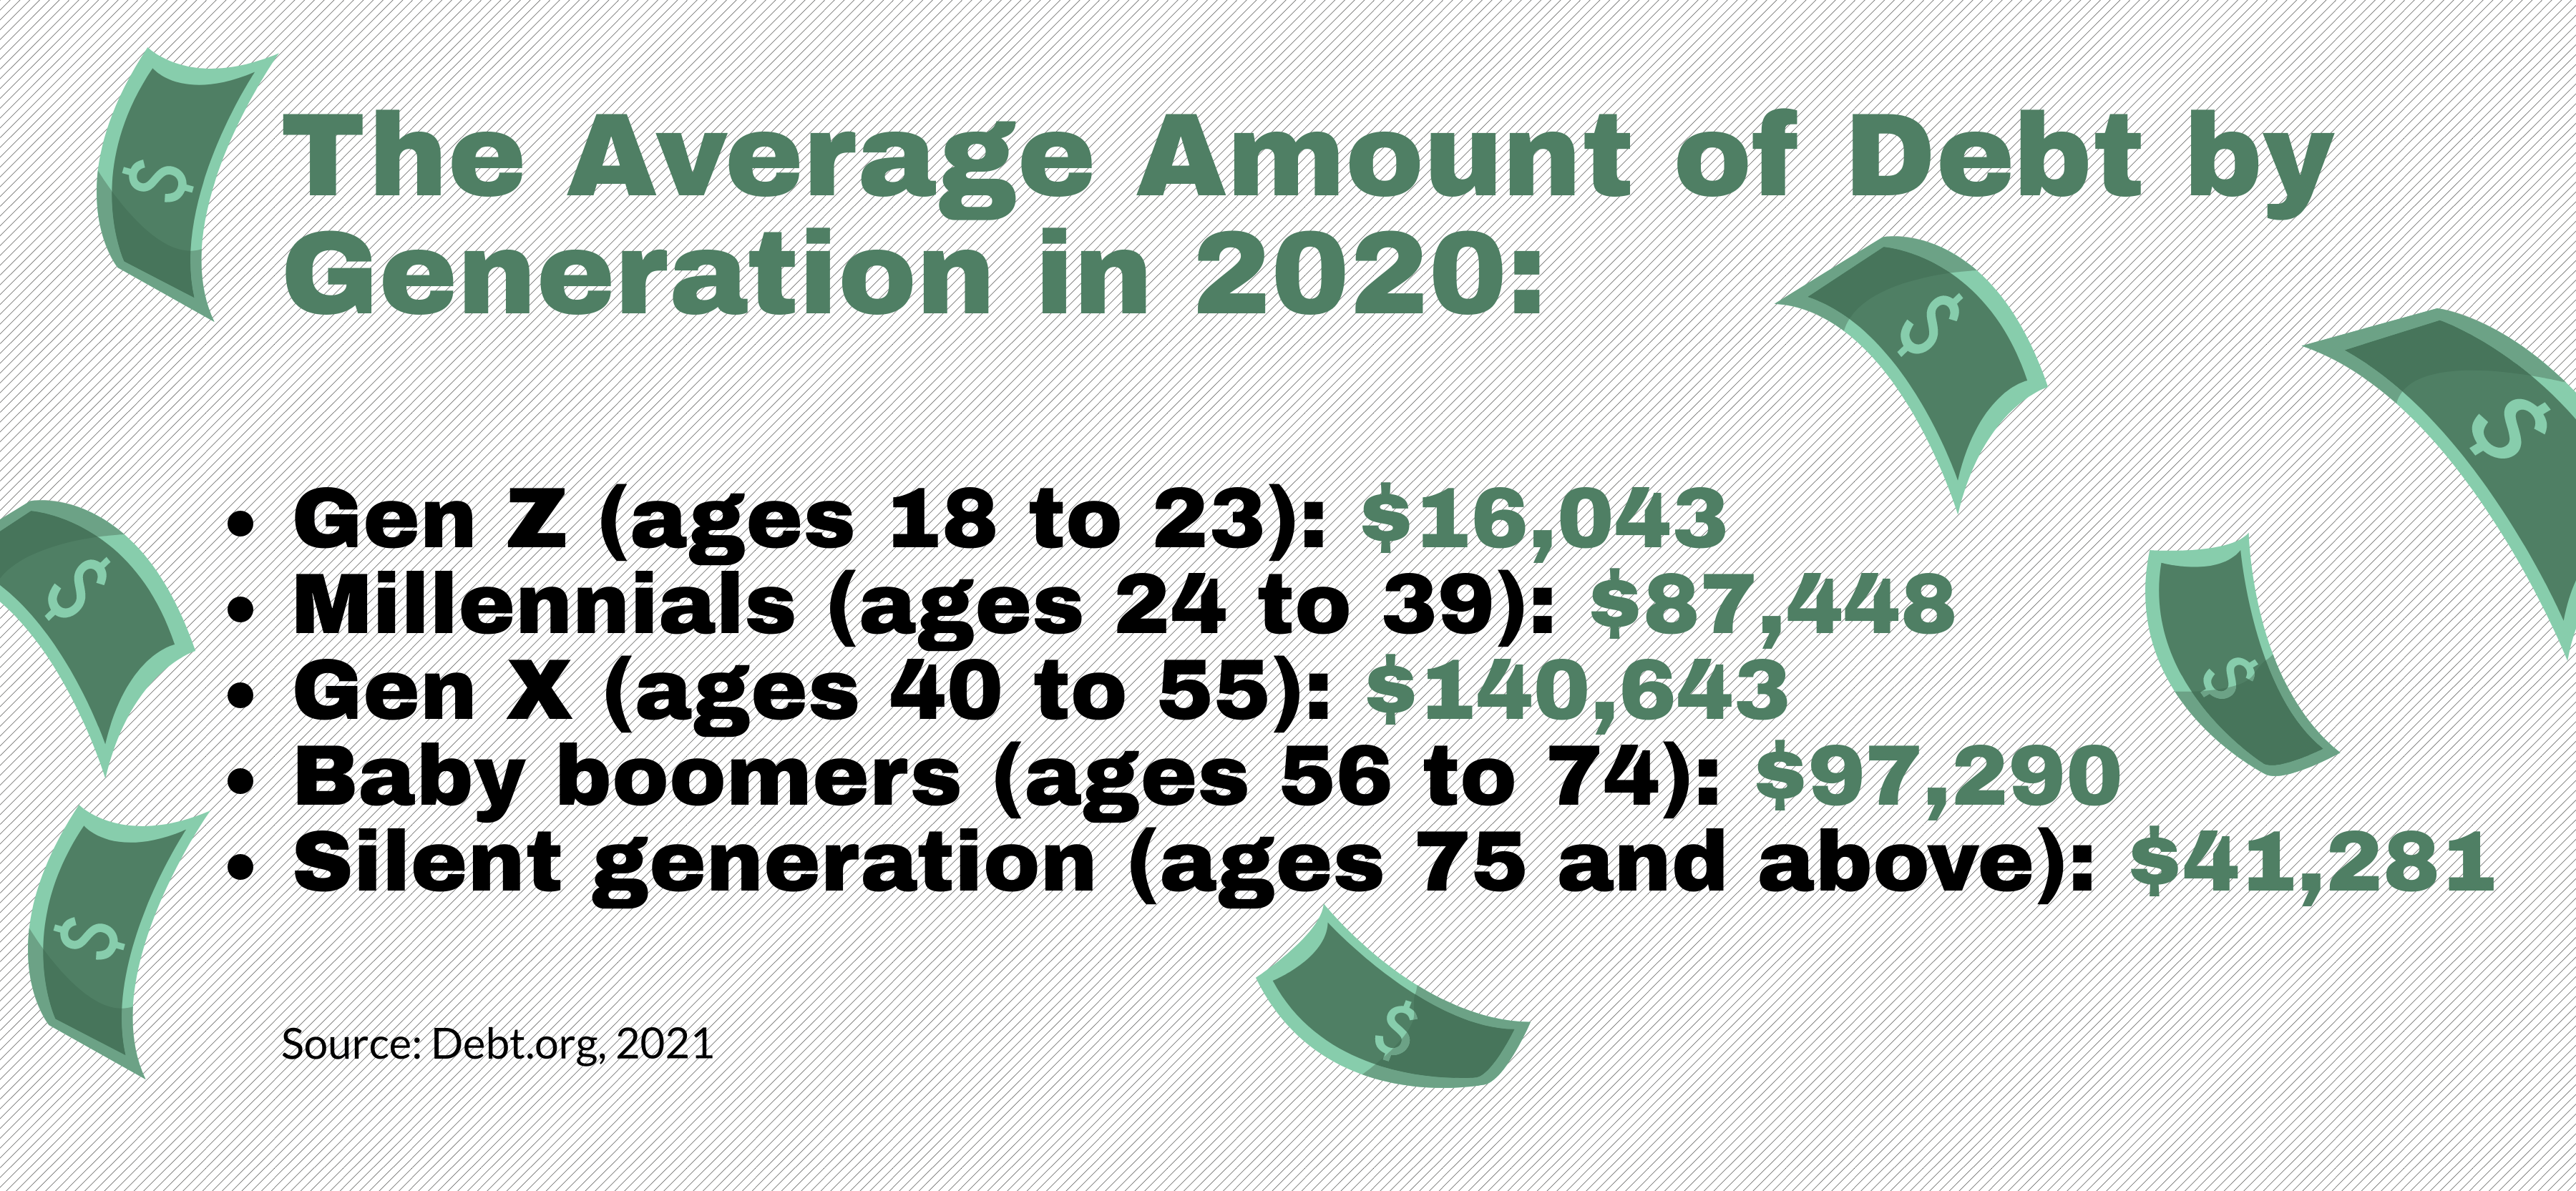 Graphic image describing the average amount of debt by generation in 2020